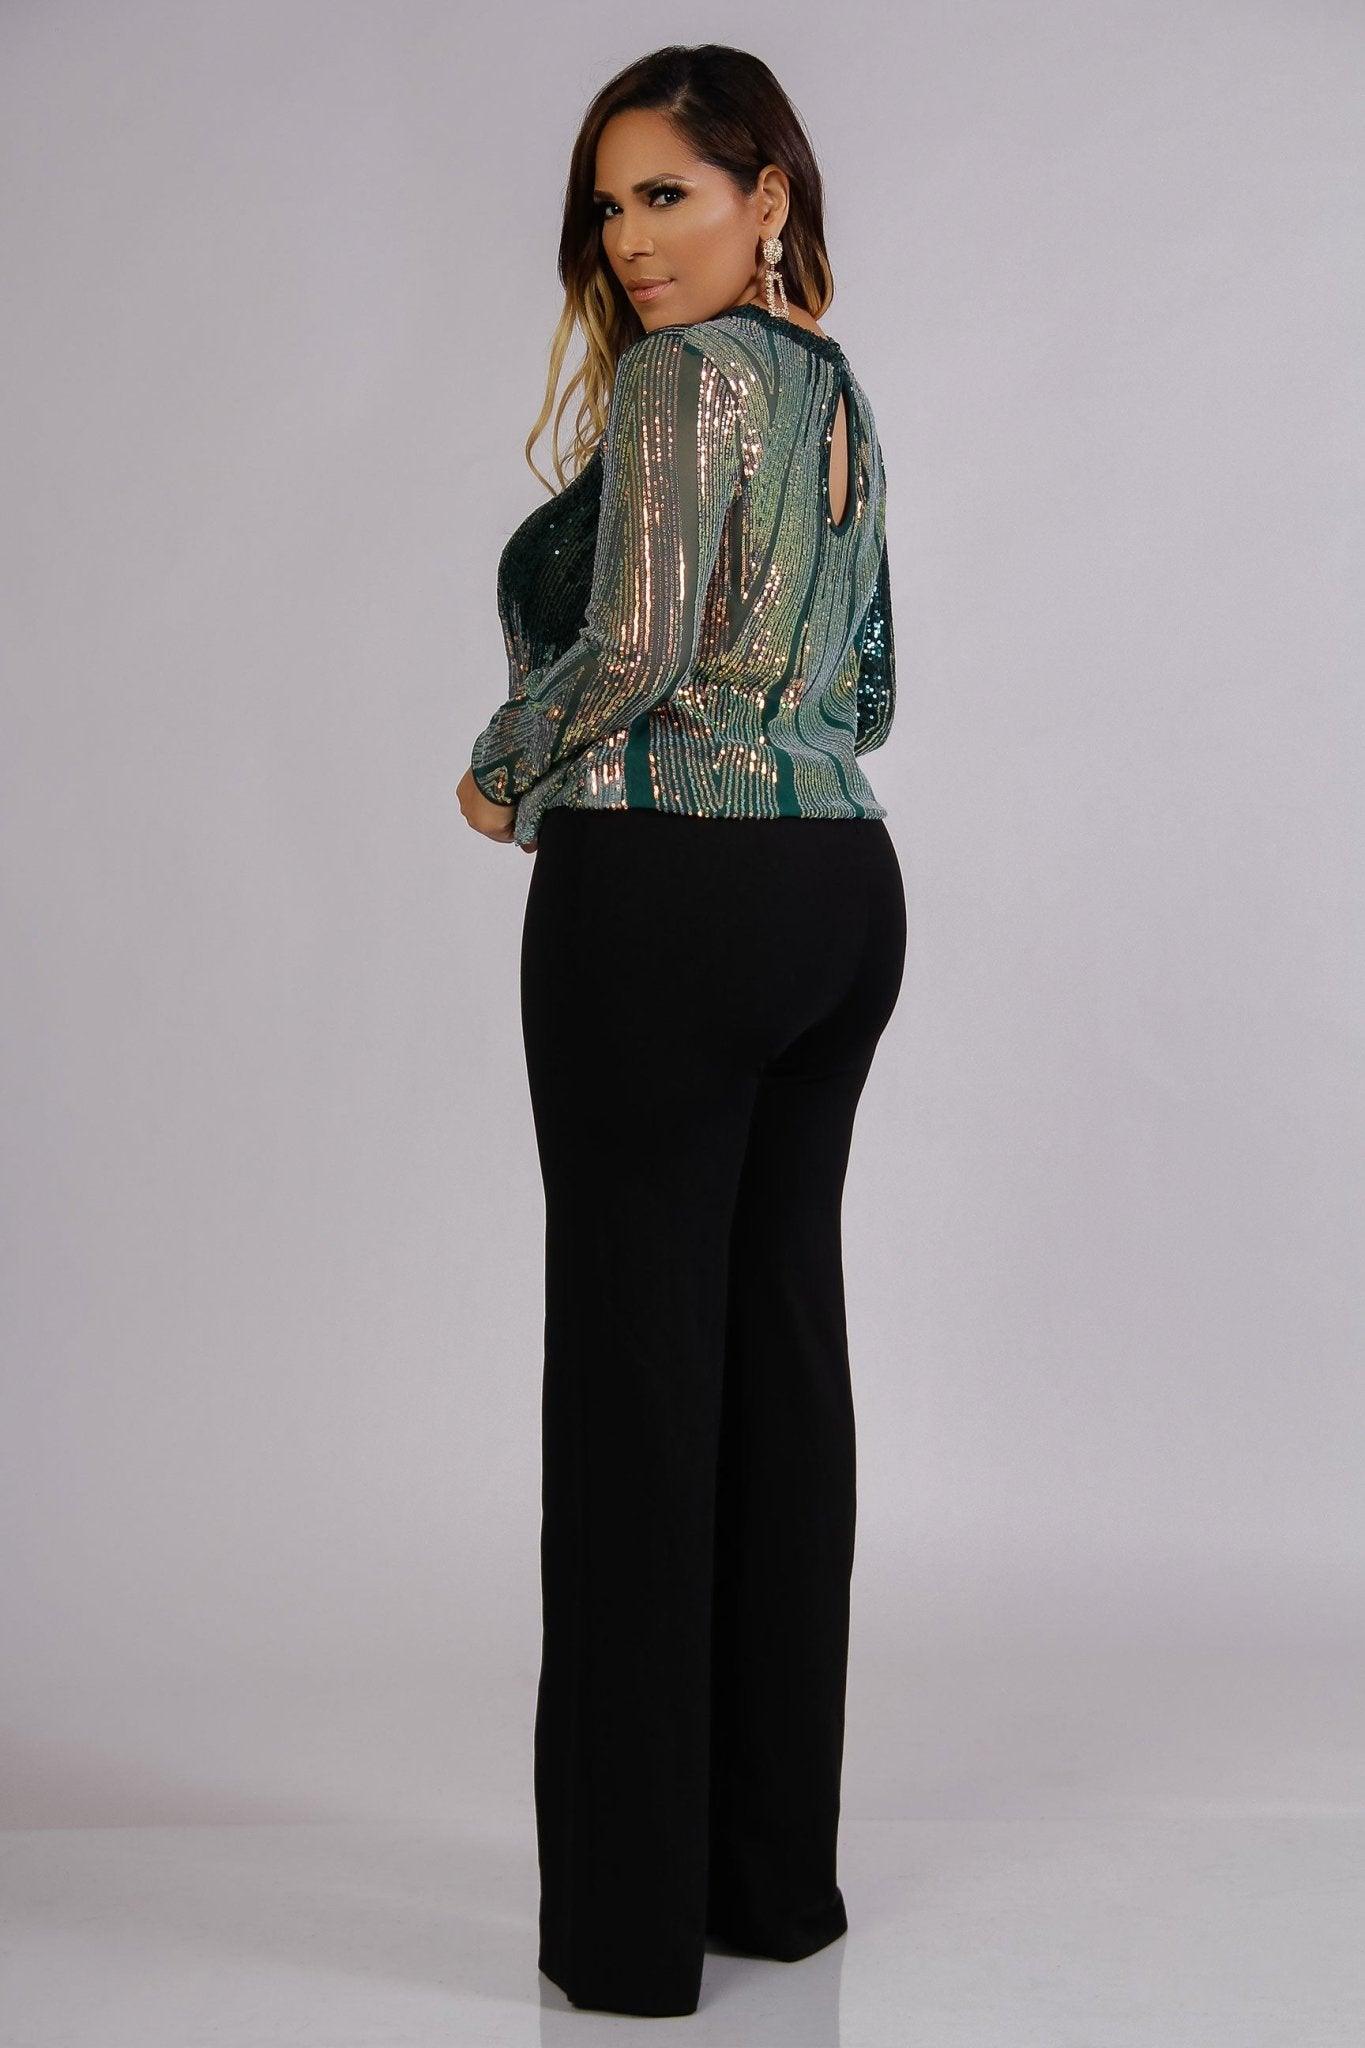 Whitney Elegant Keyhole Sequin Blouse in Green - MY SEXY STYLES